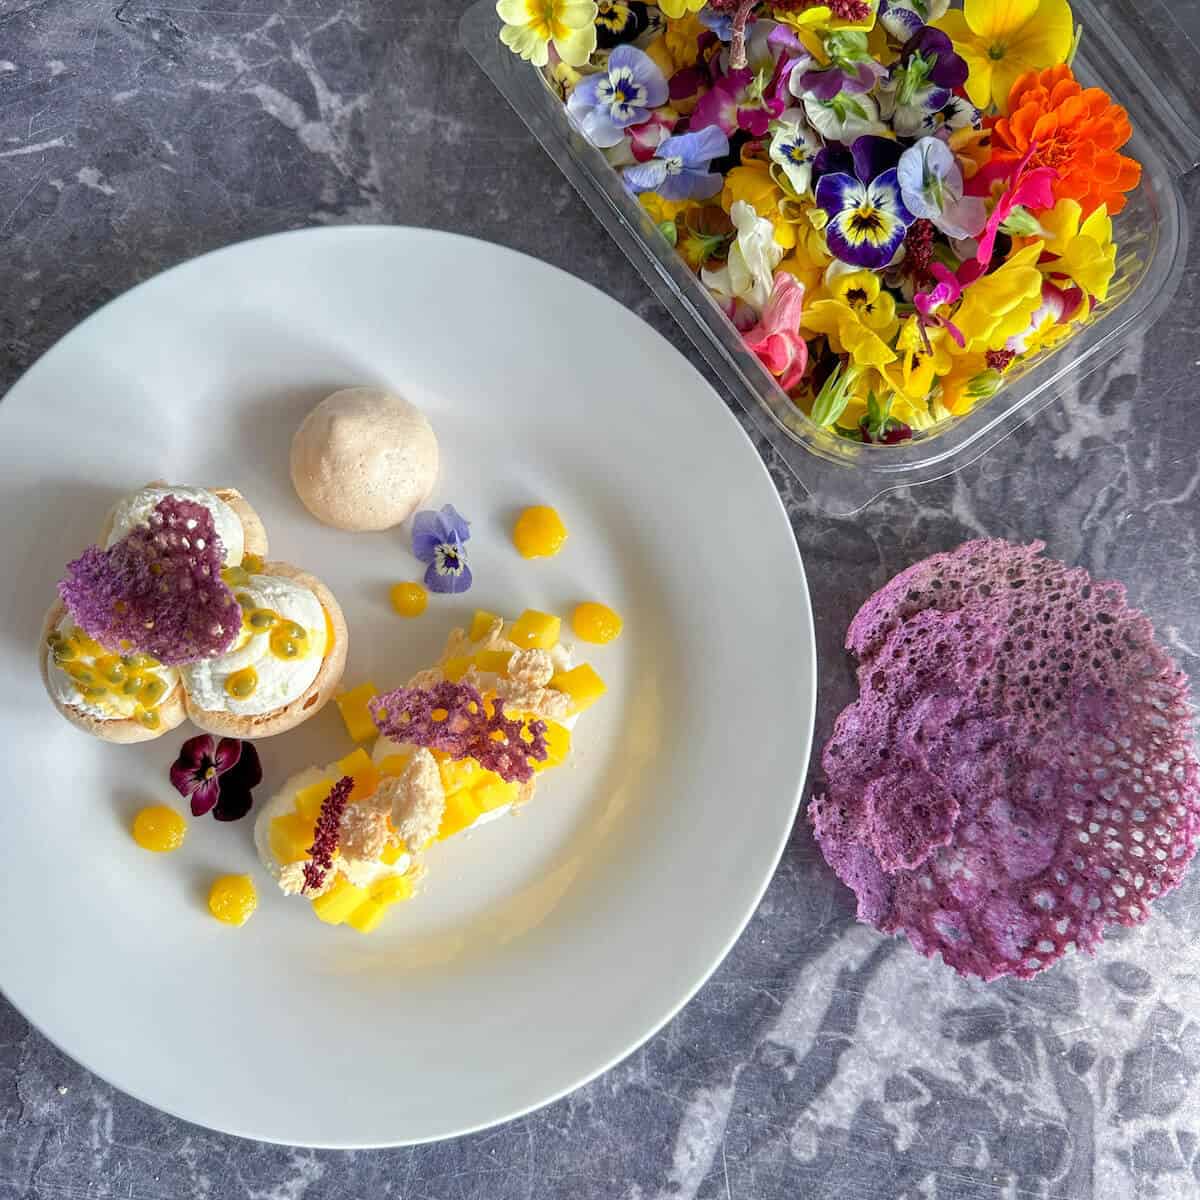 A box of edible flowers next to a plate of dessert.